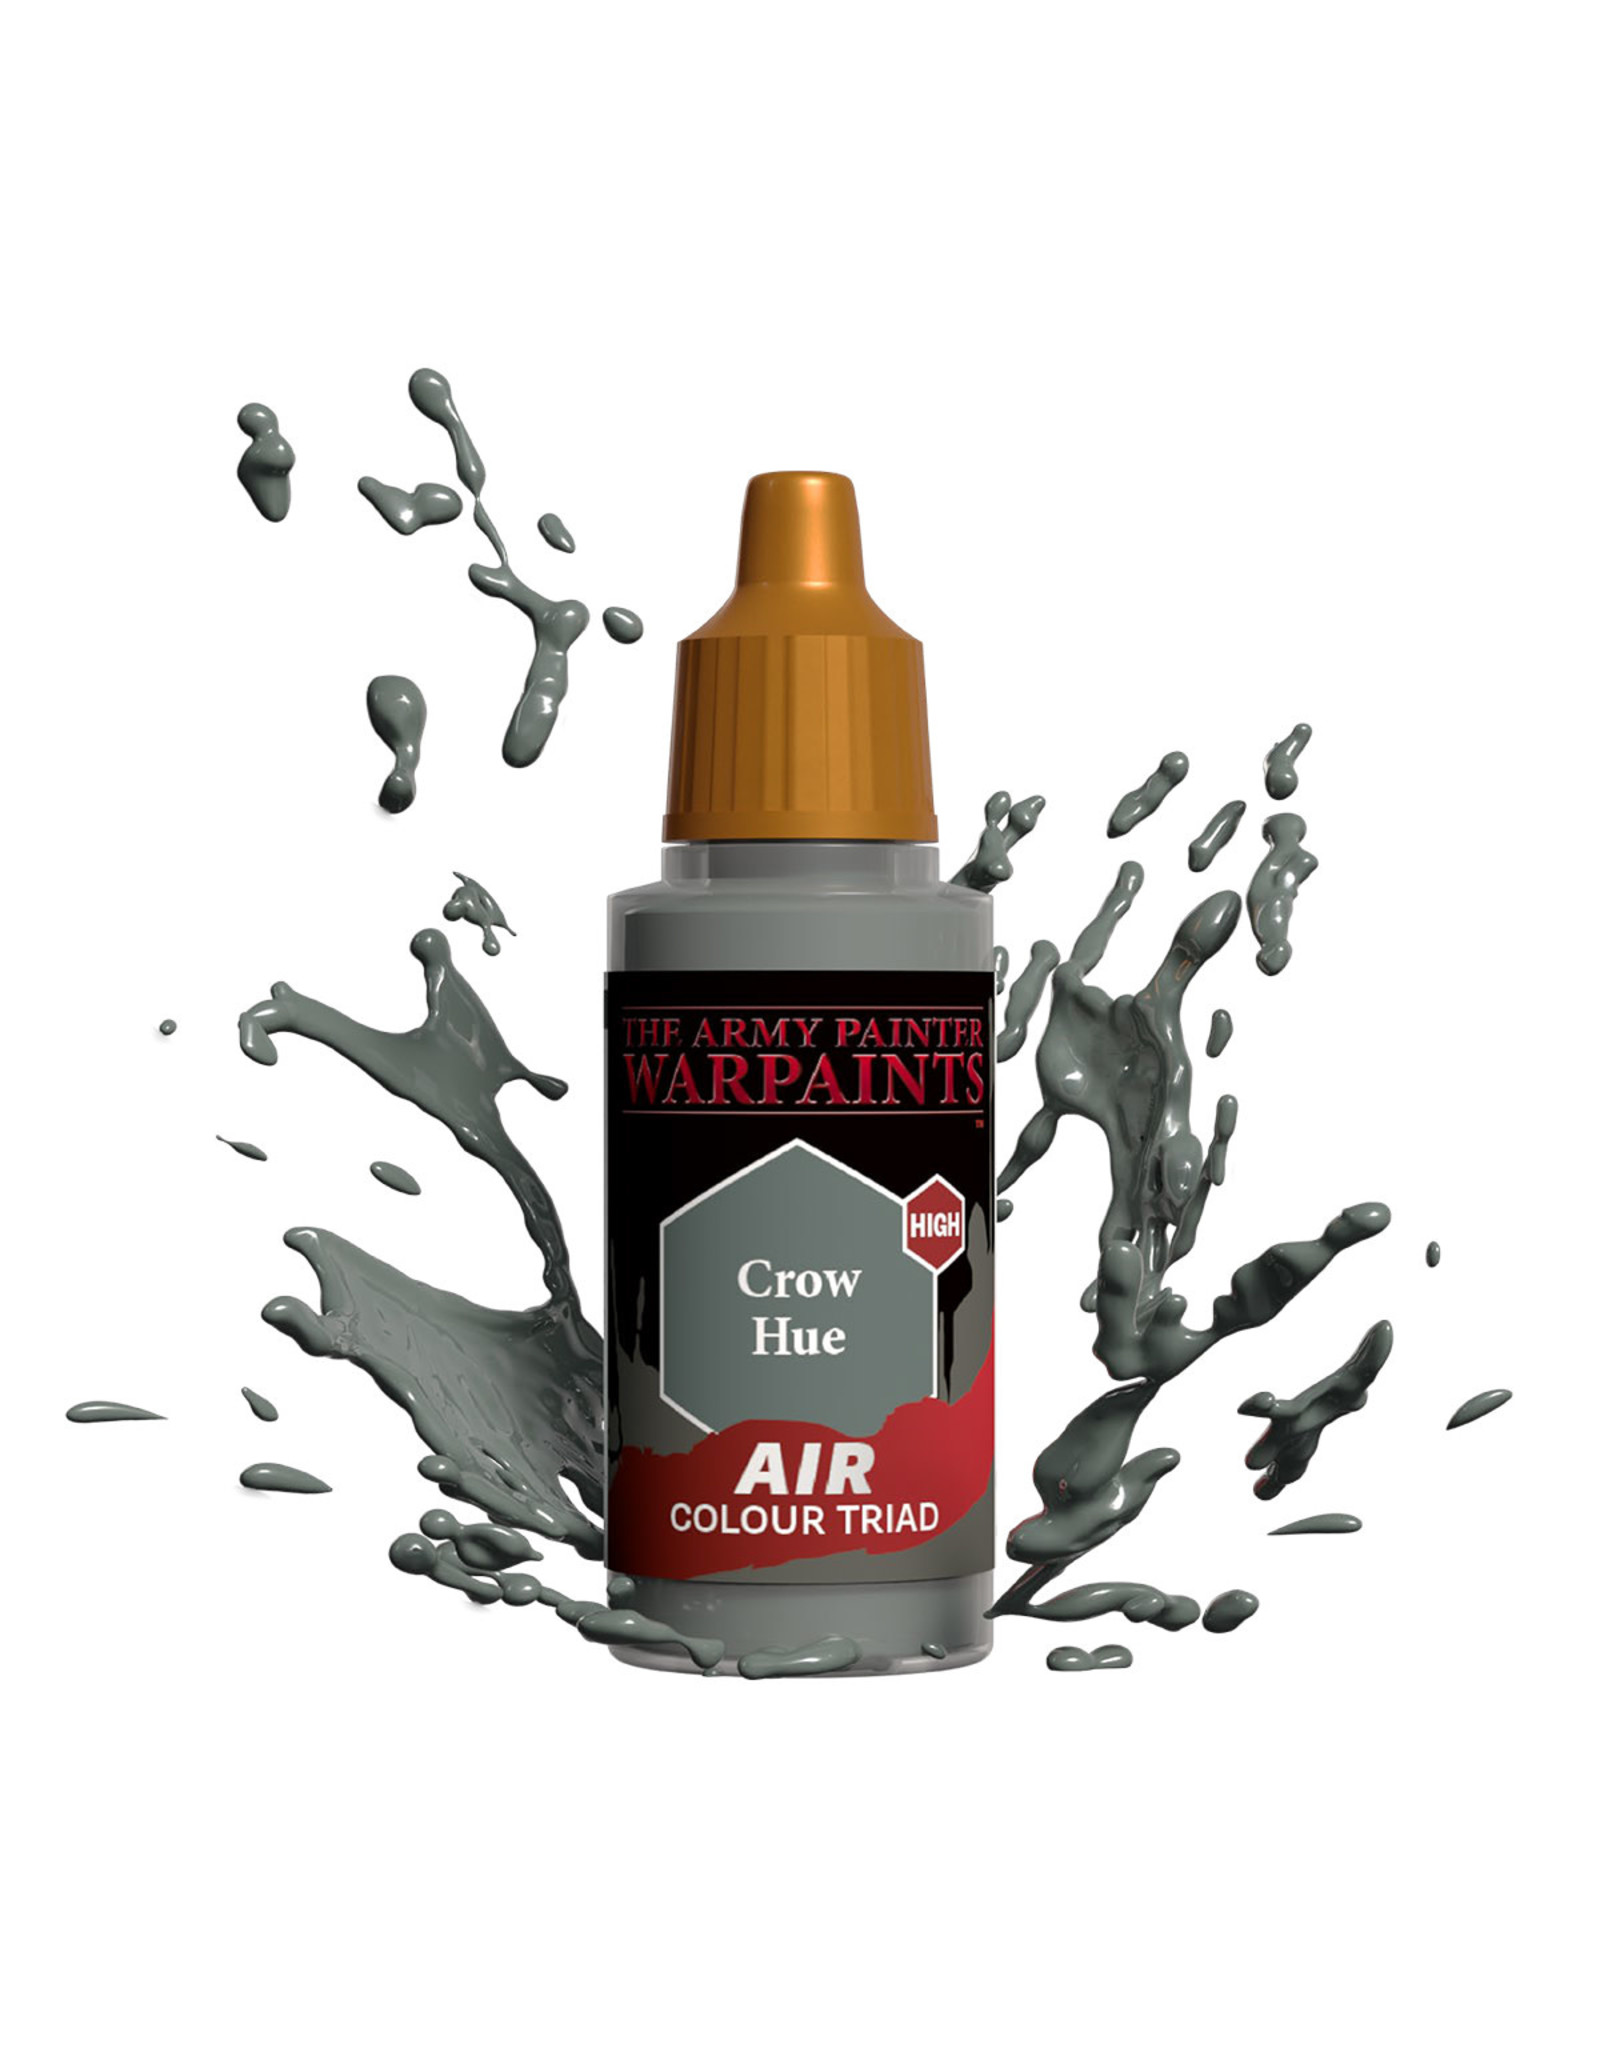 The Army Painter The Army Painter Warpaints Air: Crow Hue